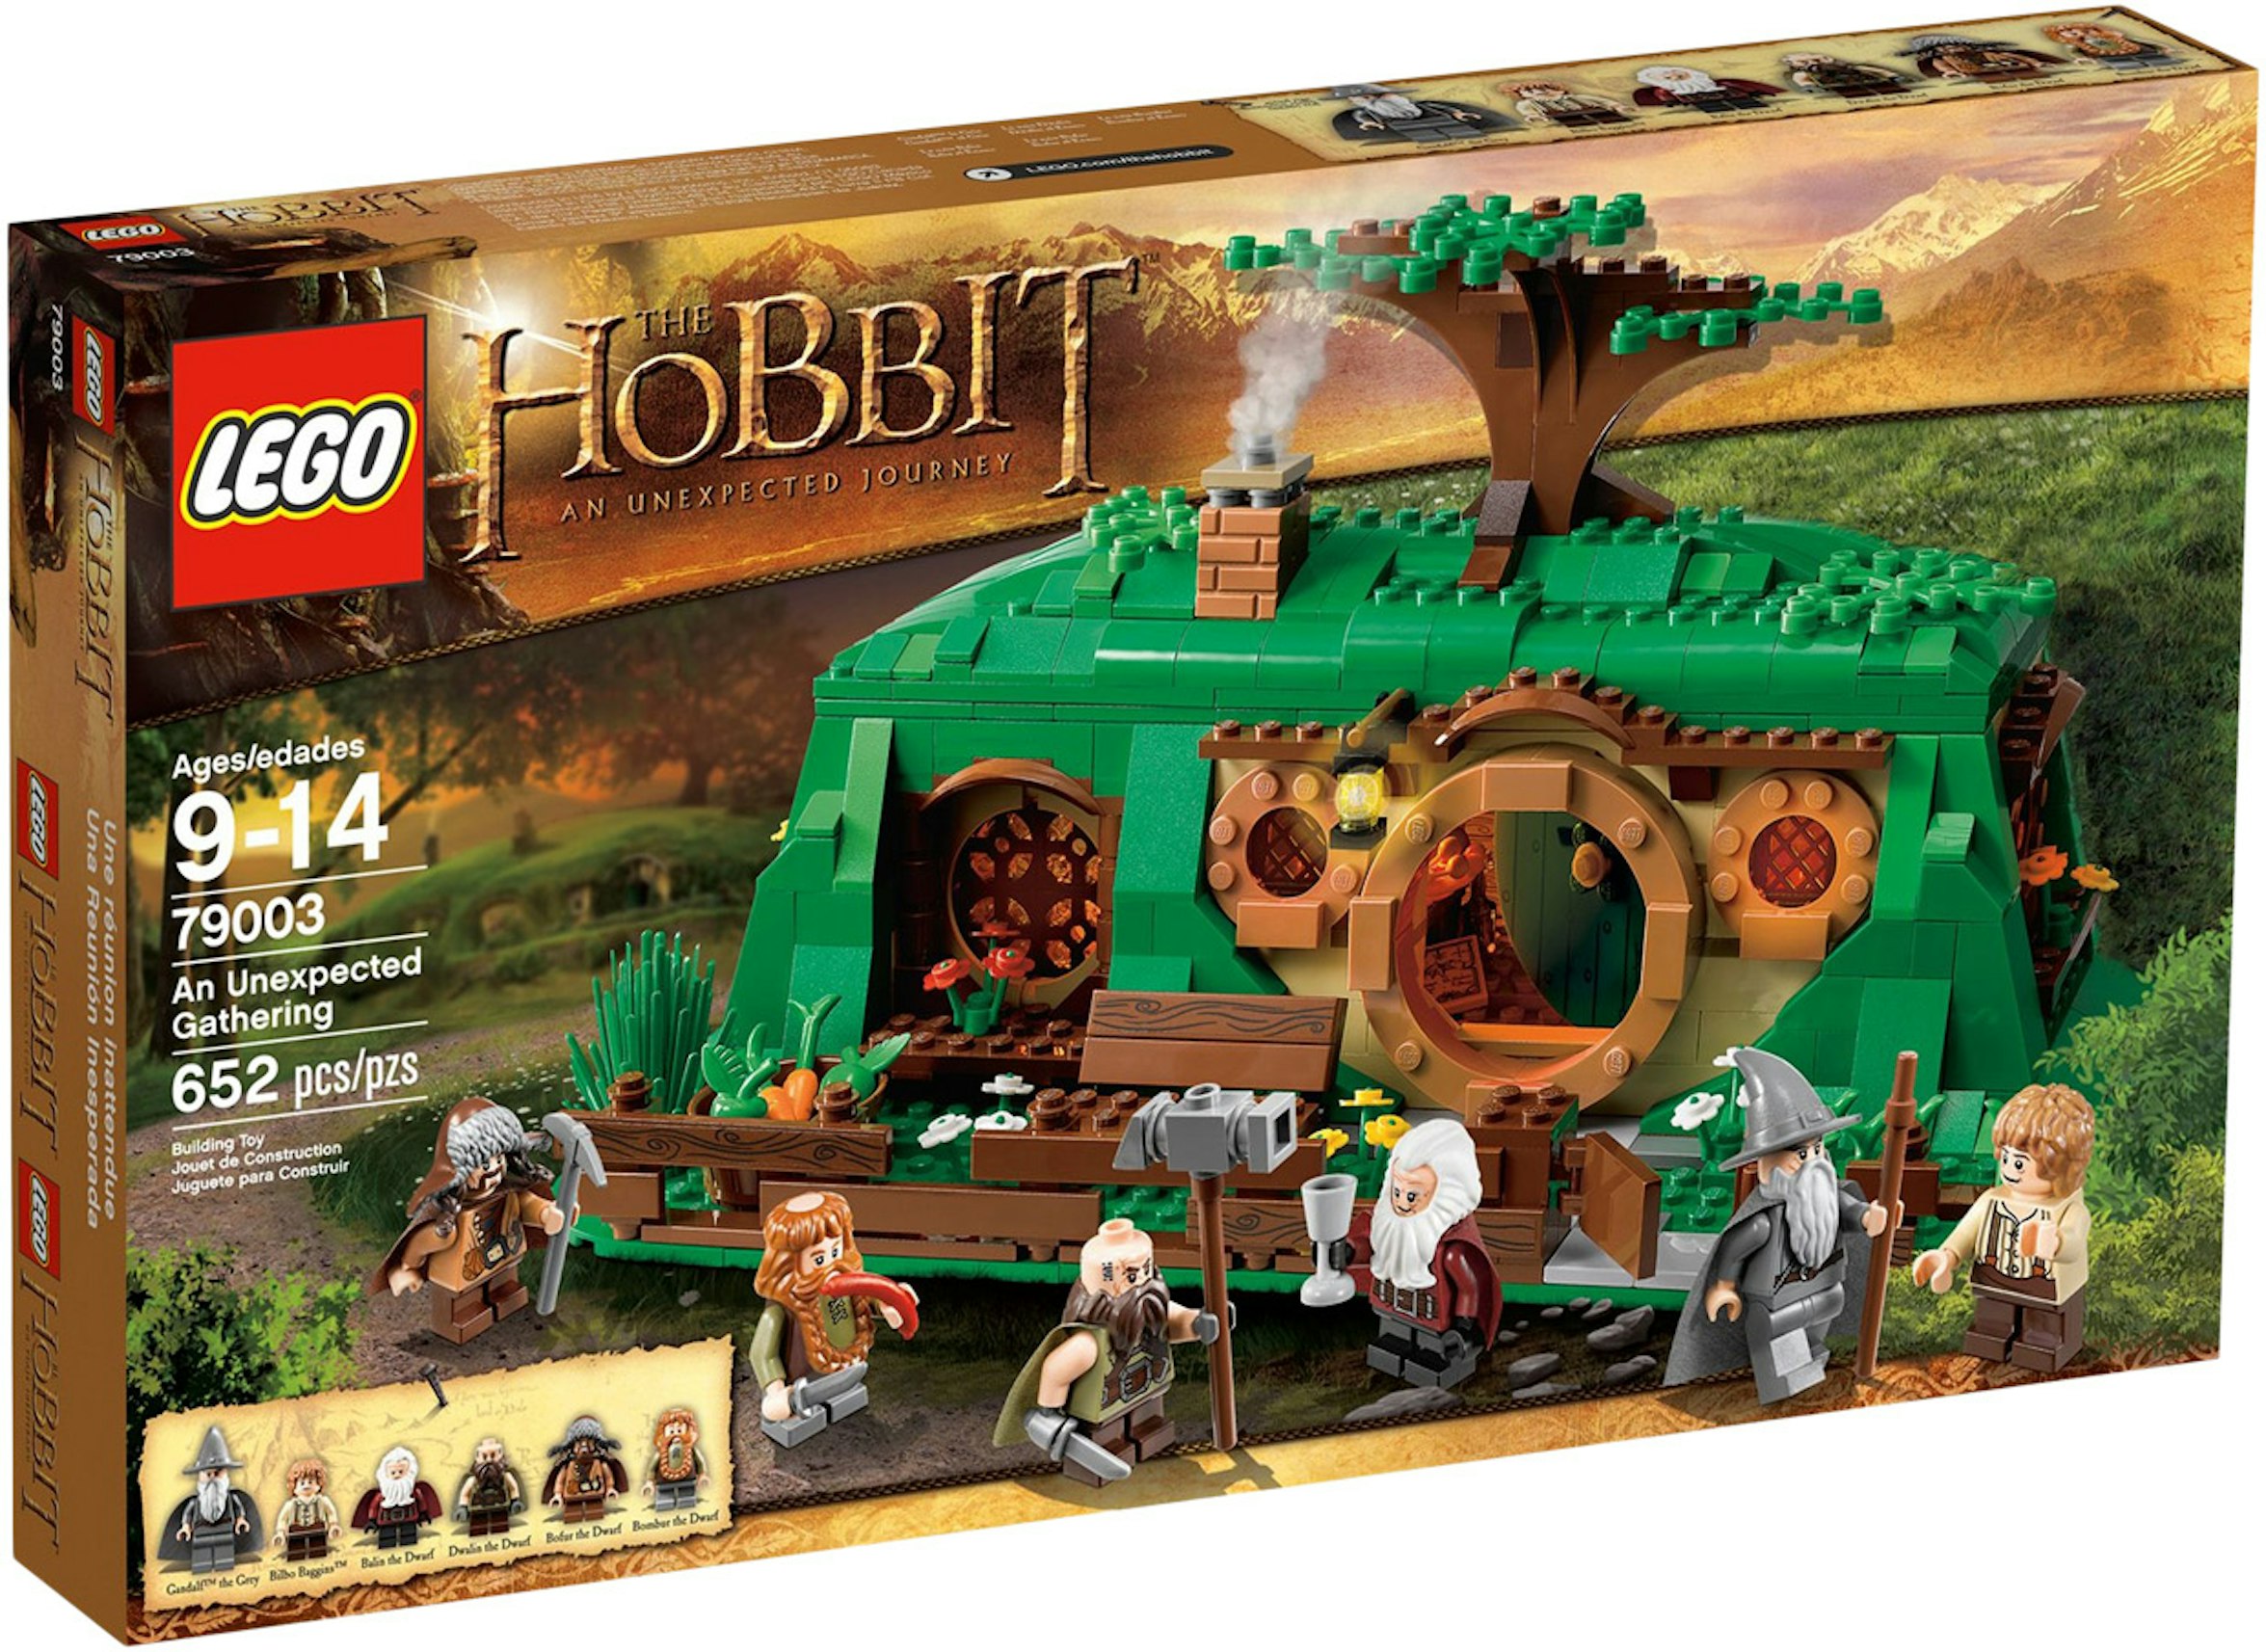 punktum Forbavselse Baby LEGO The Hobbit An Unexpected Gathering Set 79003 - US